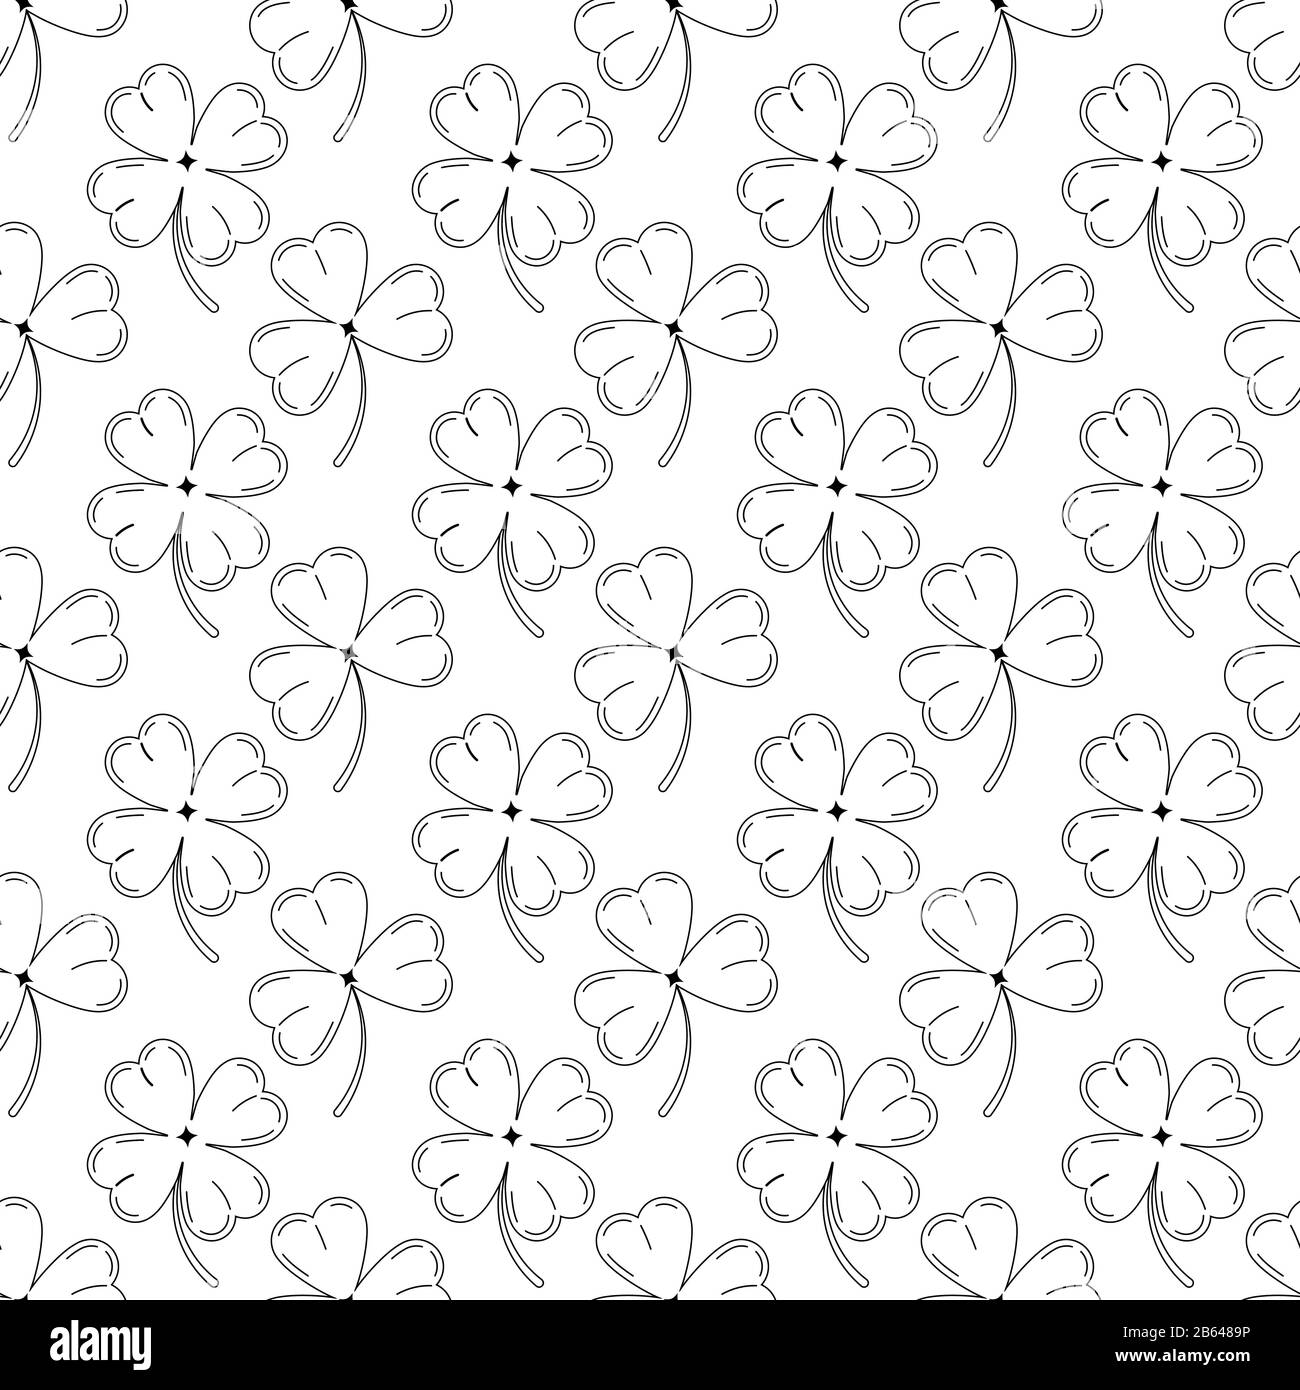 Clover leaves seamless pattern black silhouette isolated on white background. Stock Vector